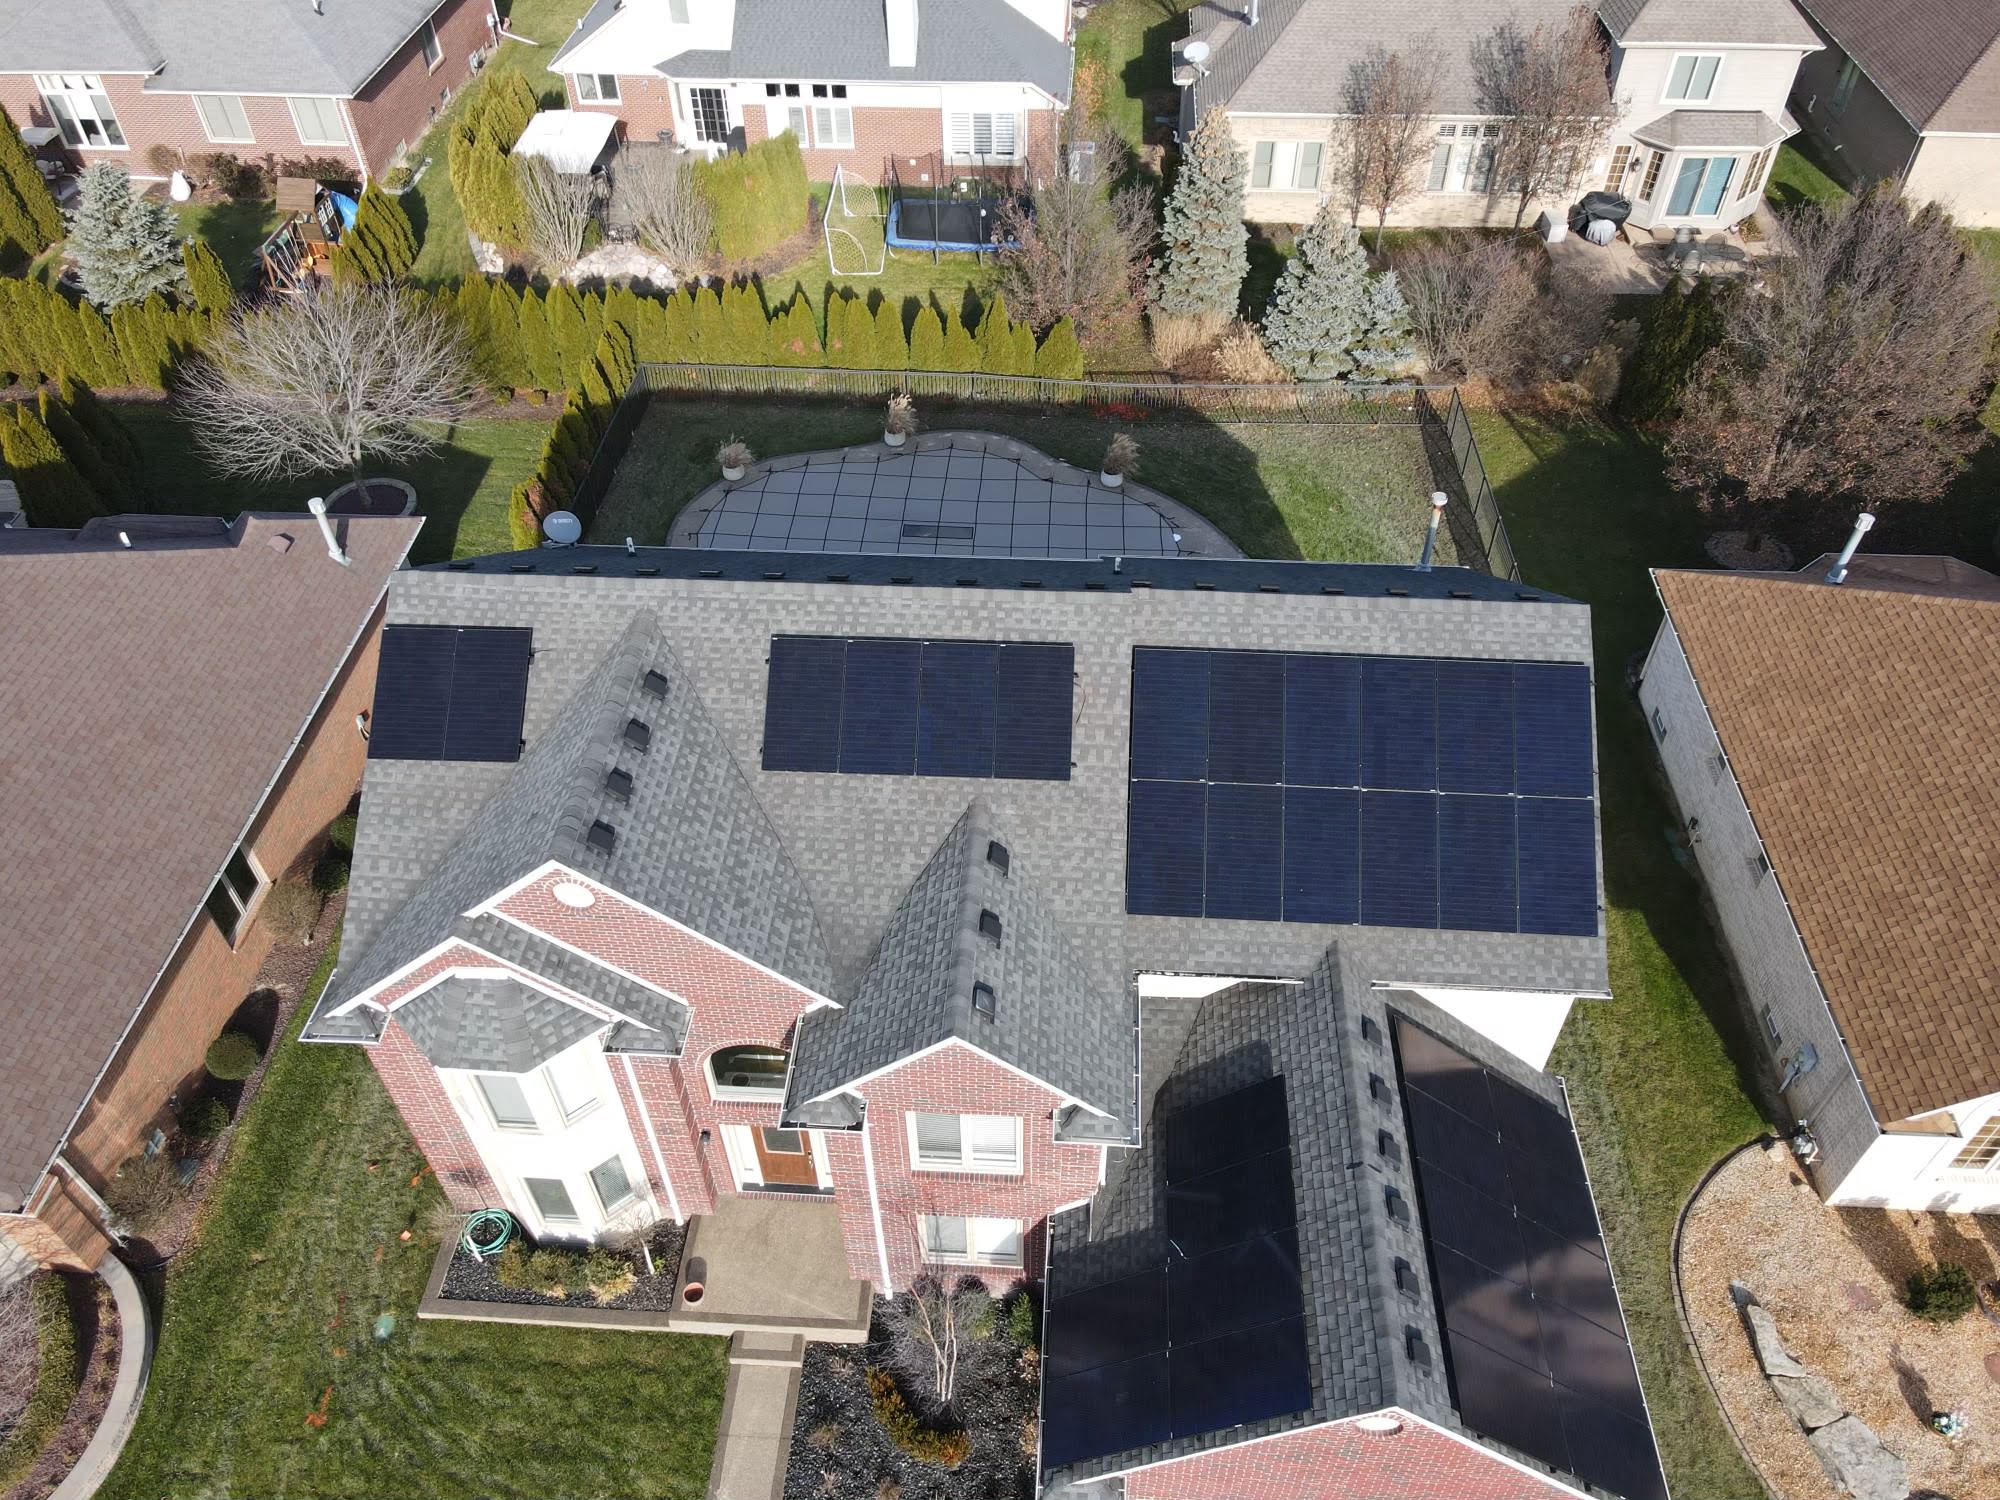 Sky view of home with solar panels